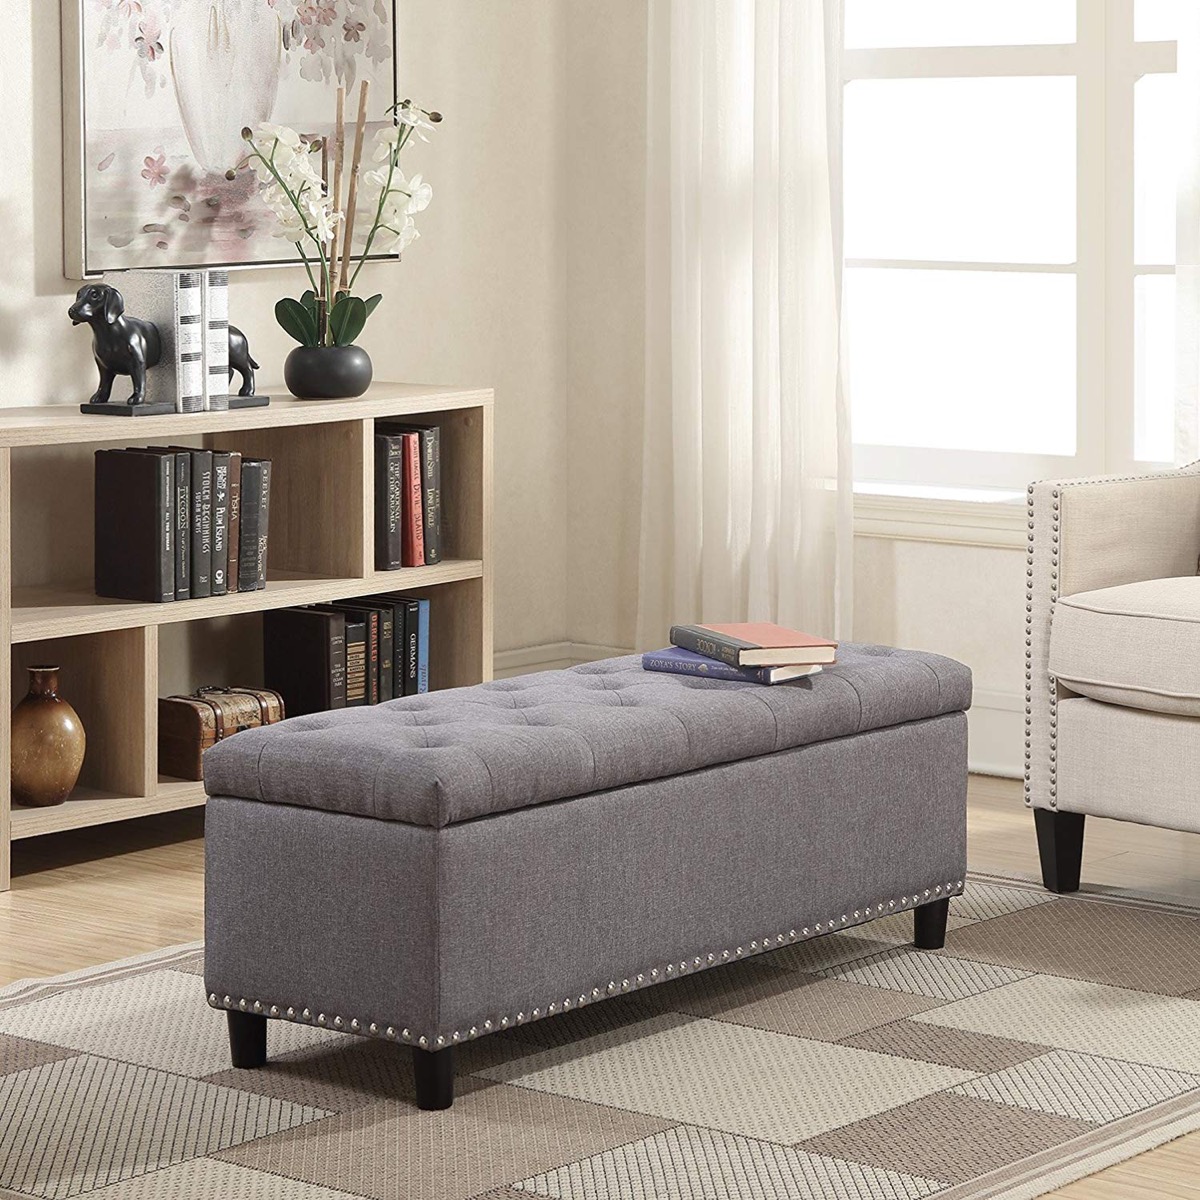 51 storage benches to streamline your seating and storage